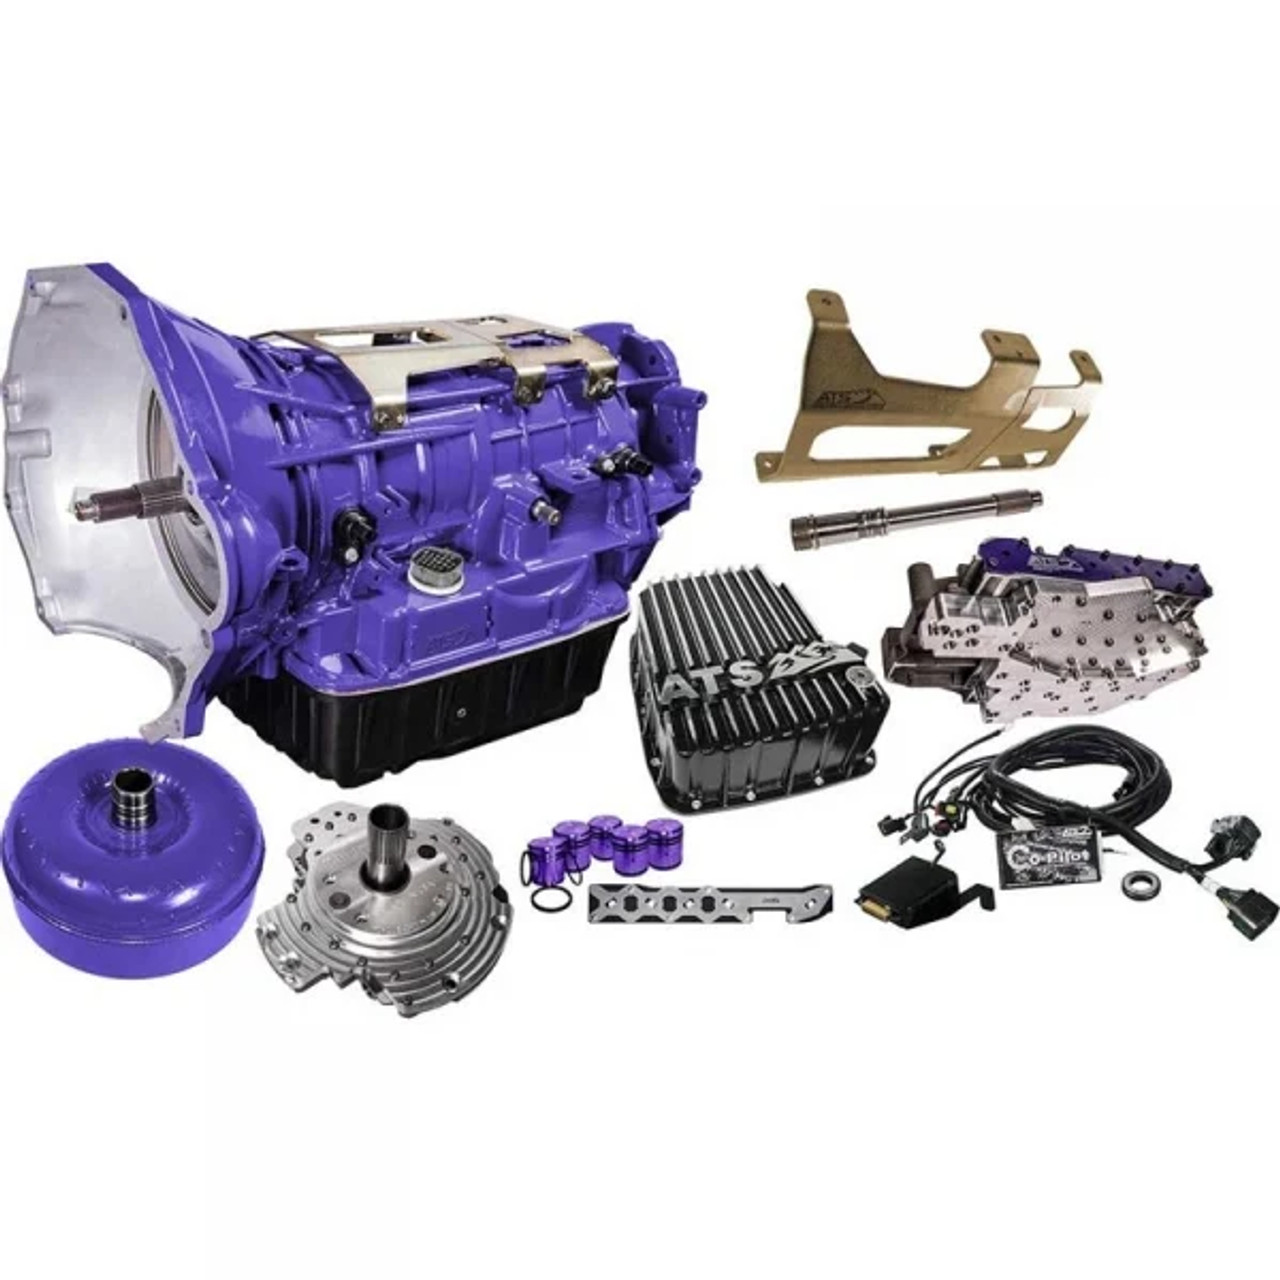 ATS Stage 2 68RFE 4WD Transmission Package with Co Pilot 2012 to 2018 6.7L Cummins 4WD (ATS3096272380)-Main View